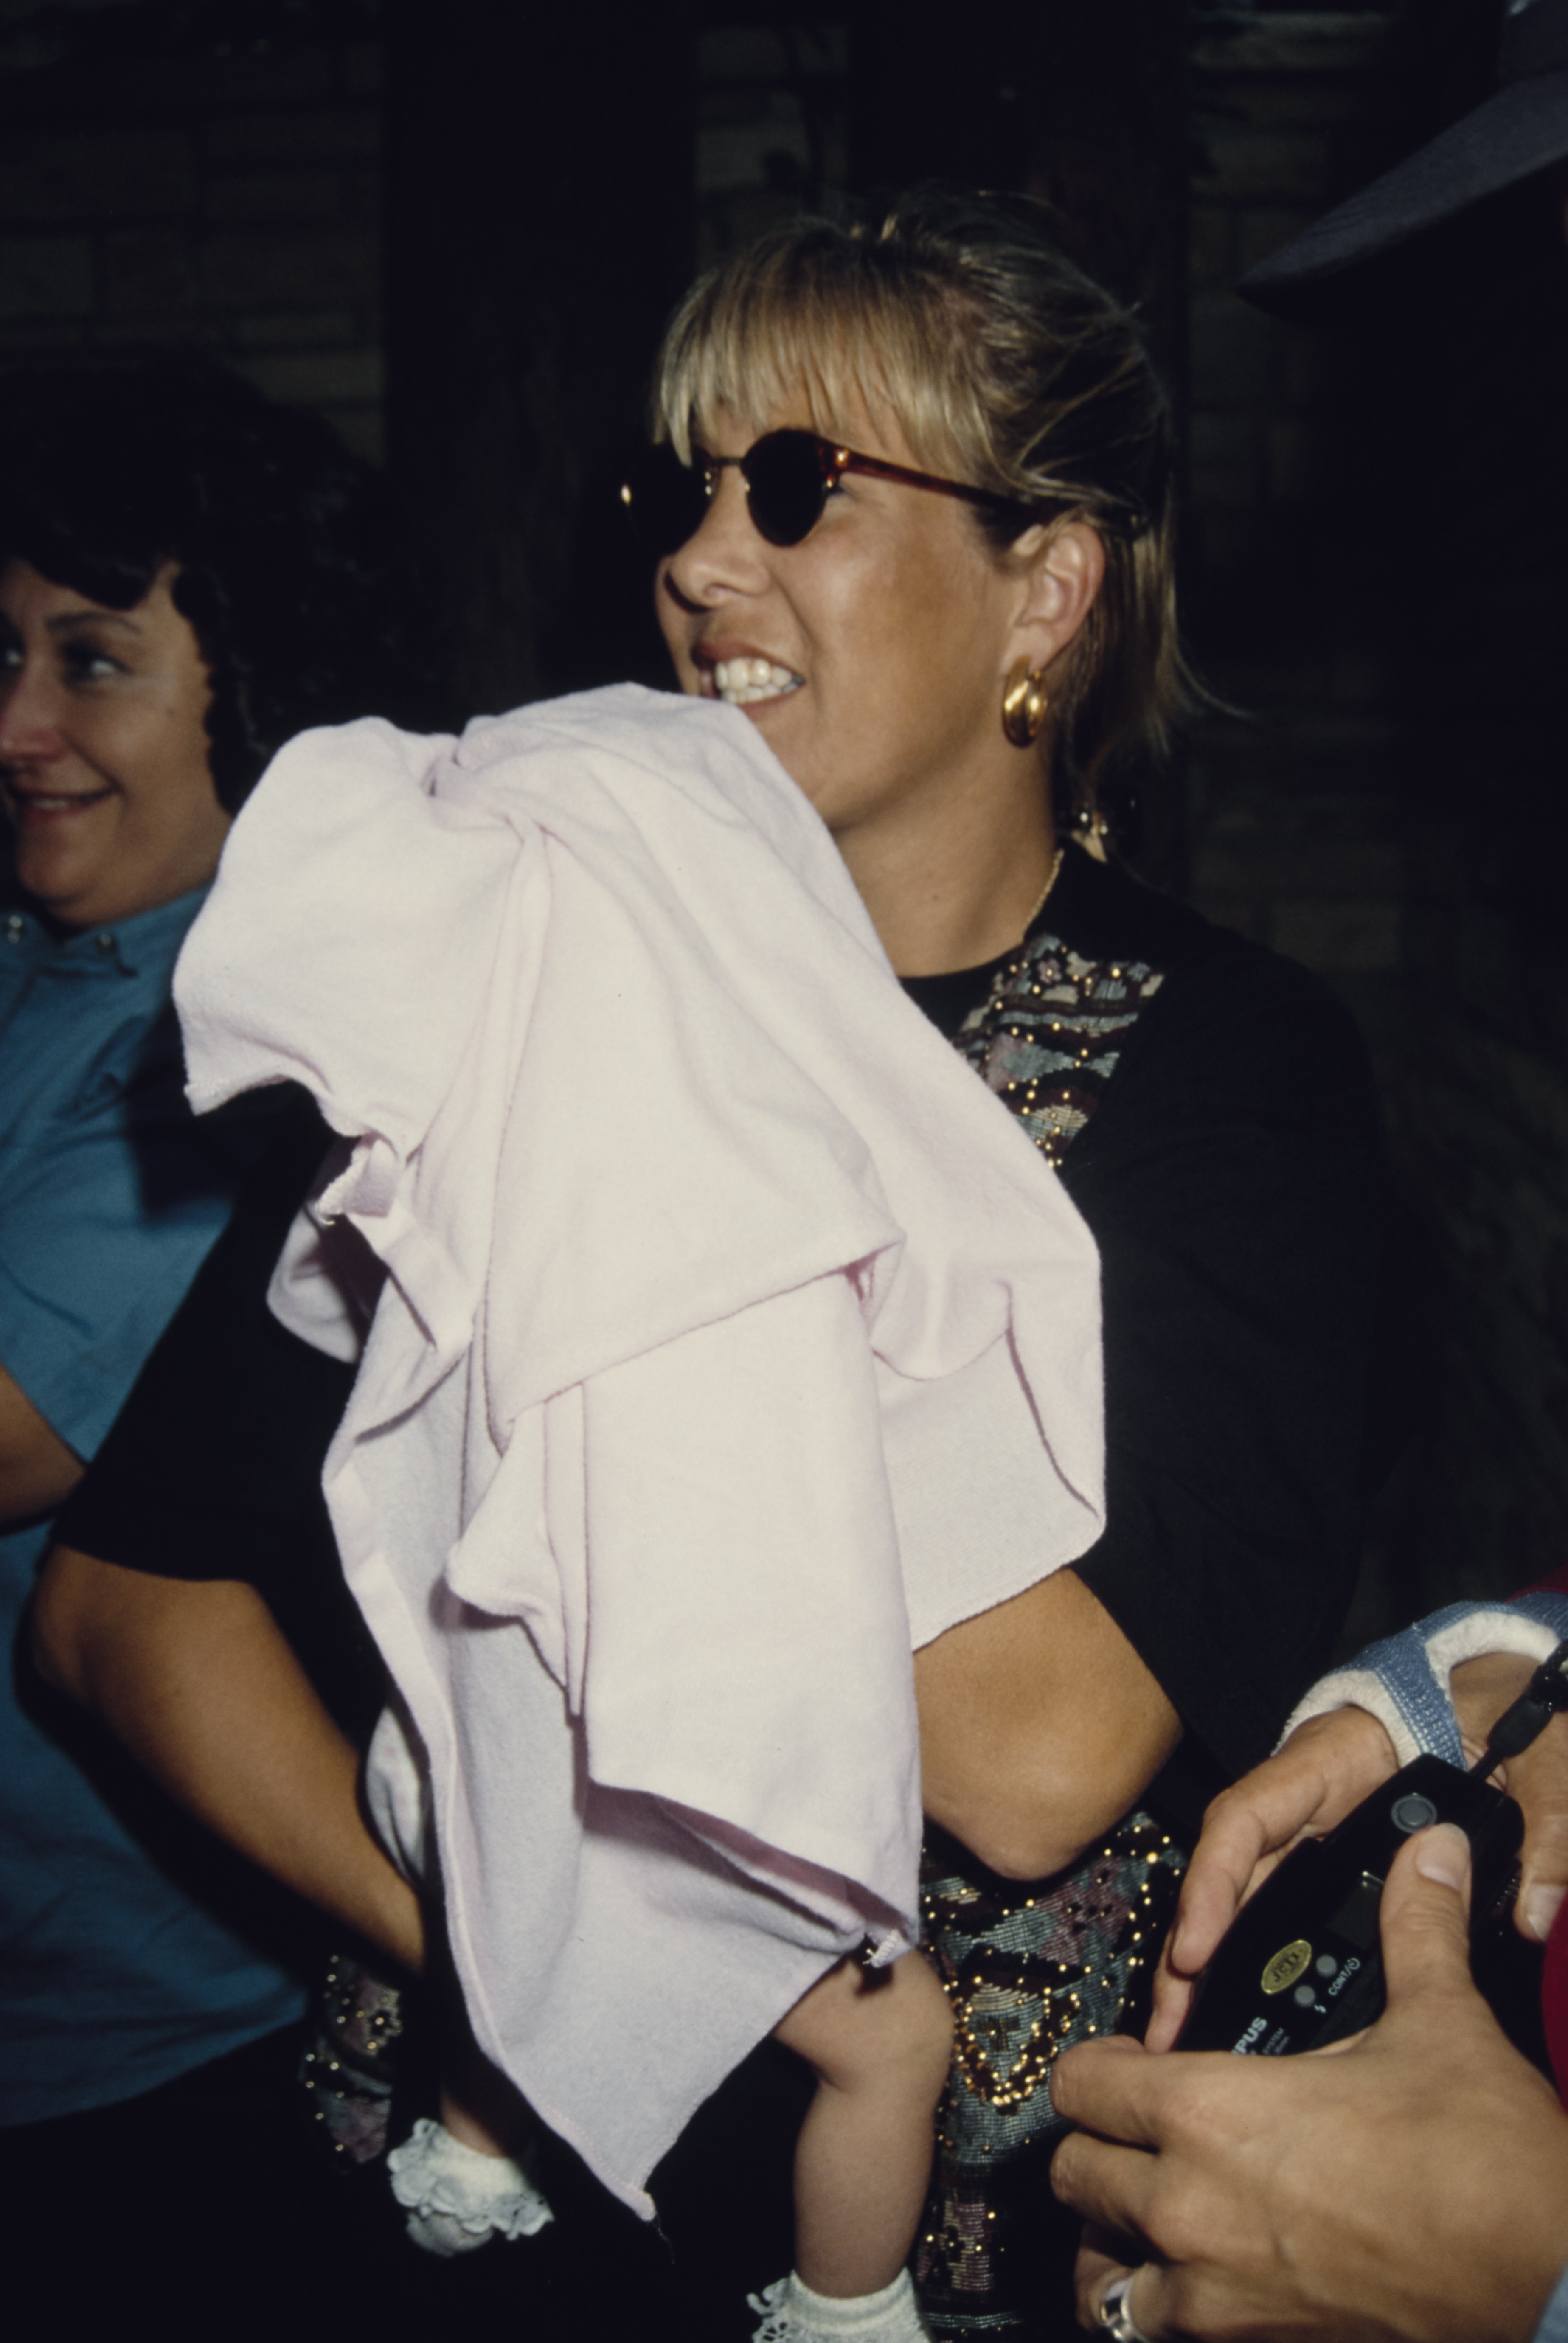 American songwriter Sandy Mahl holding her daughter, August Anna, backstage at Garth Brook's concert date at the Hollywood Bowl in Los Angeles, California, 14th July 1994. | Source: Getty Images